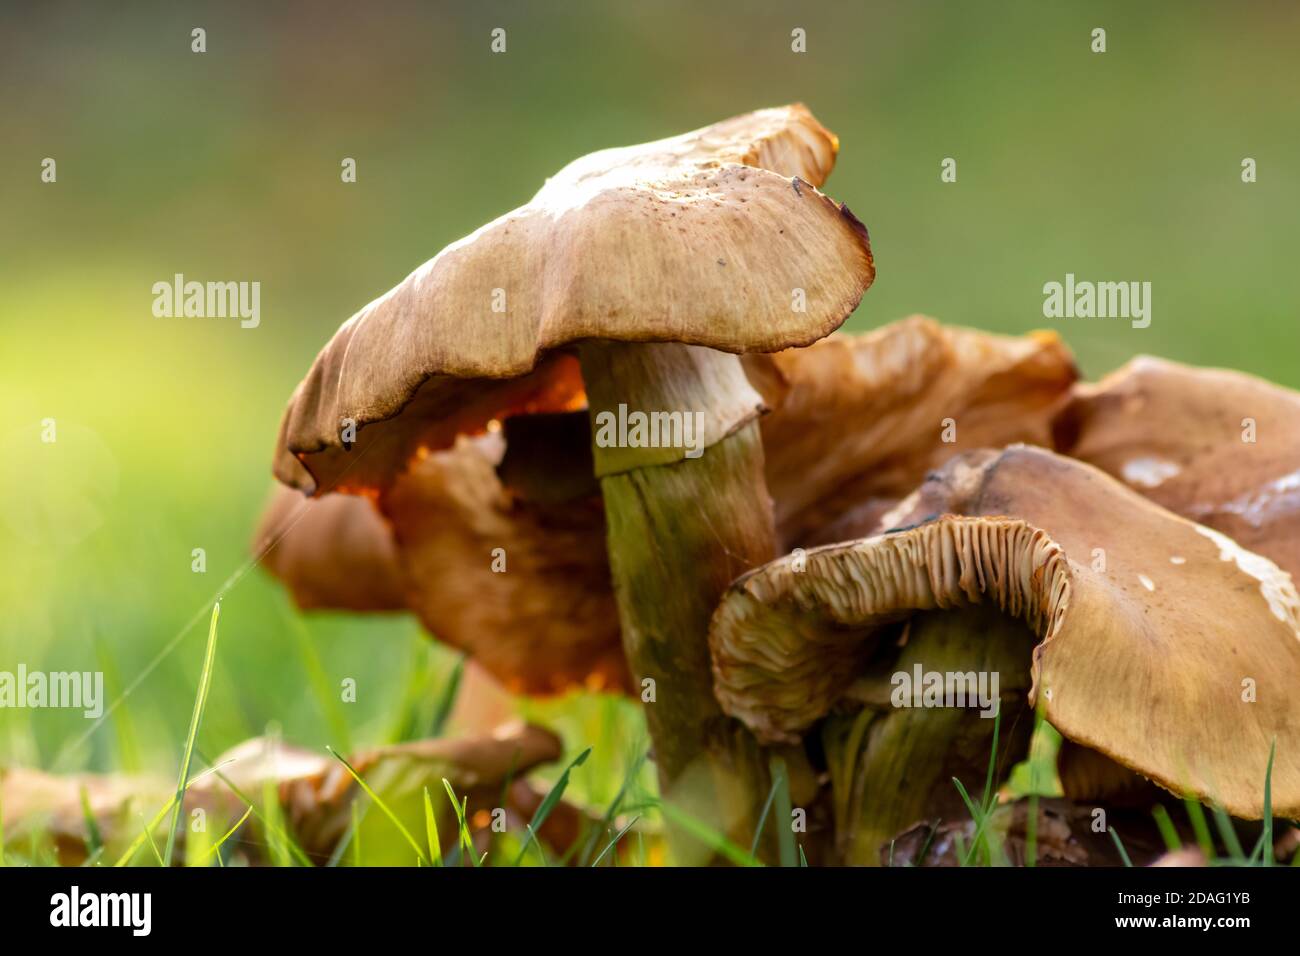 Big mushrooms in a forest found on mushrooming tour in autumn with brown foliage in backlight on the ground in mushroom season as delicious Stock Photo